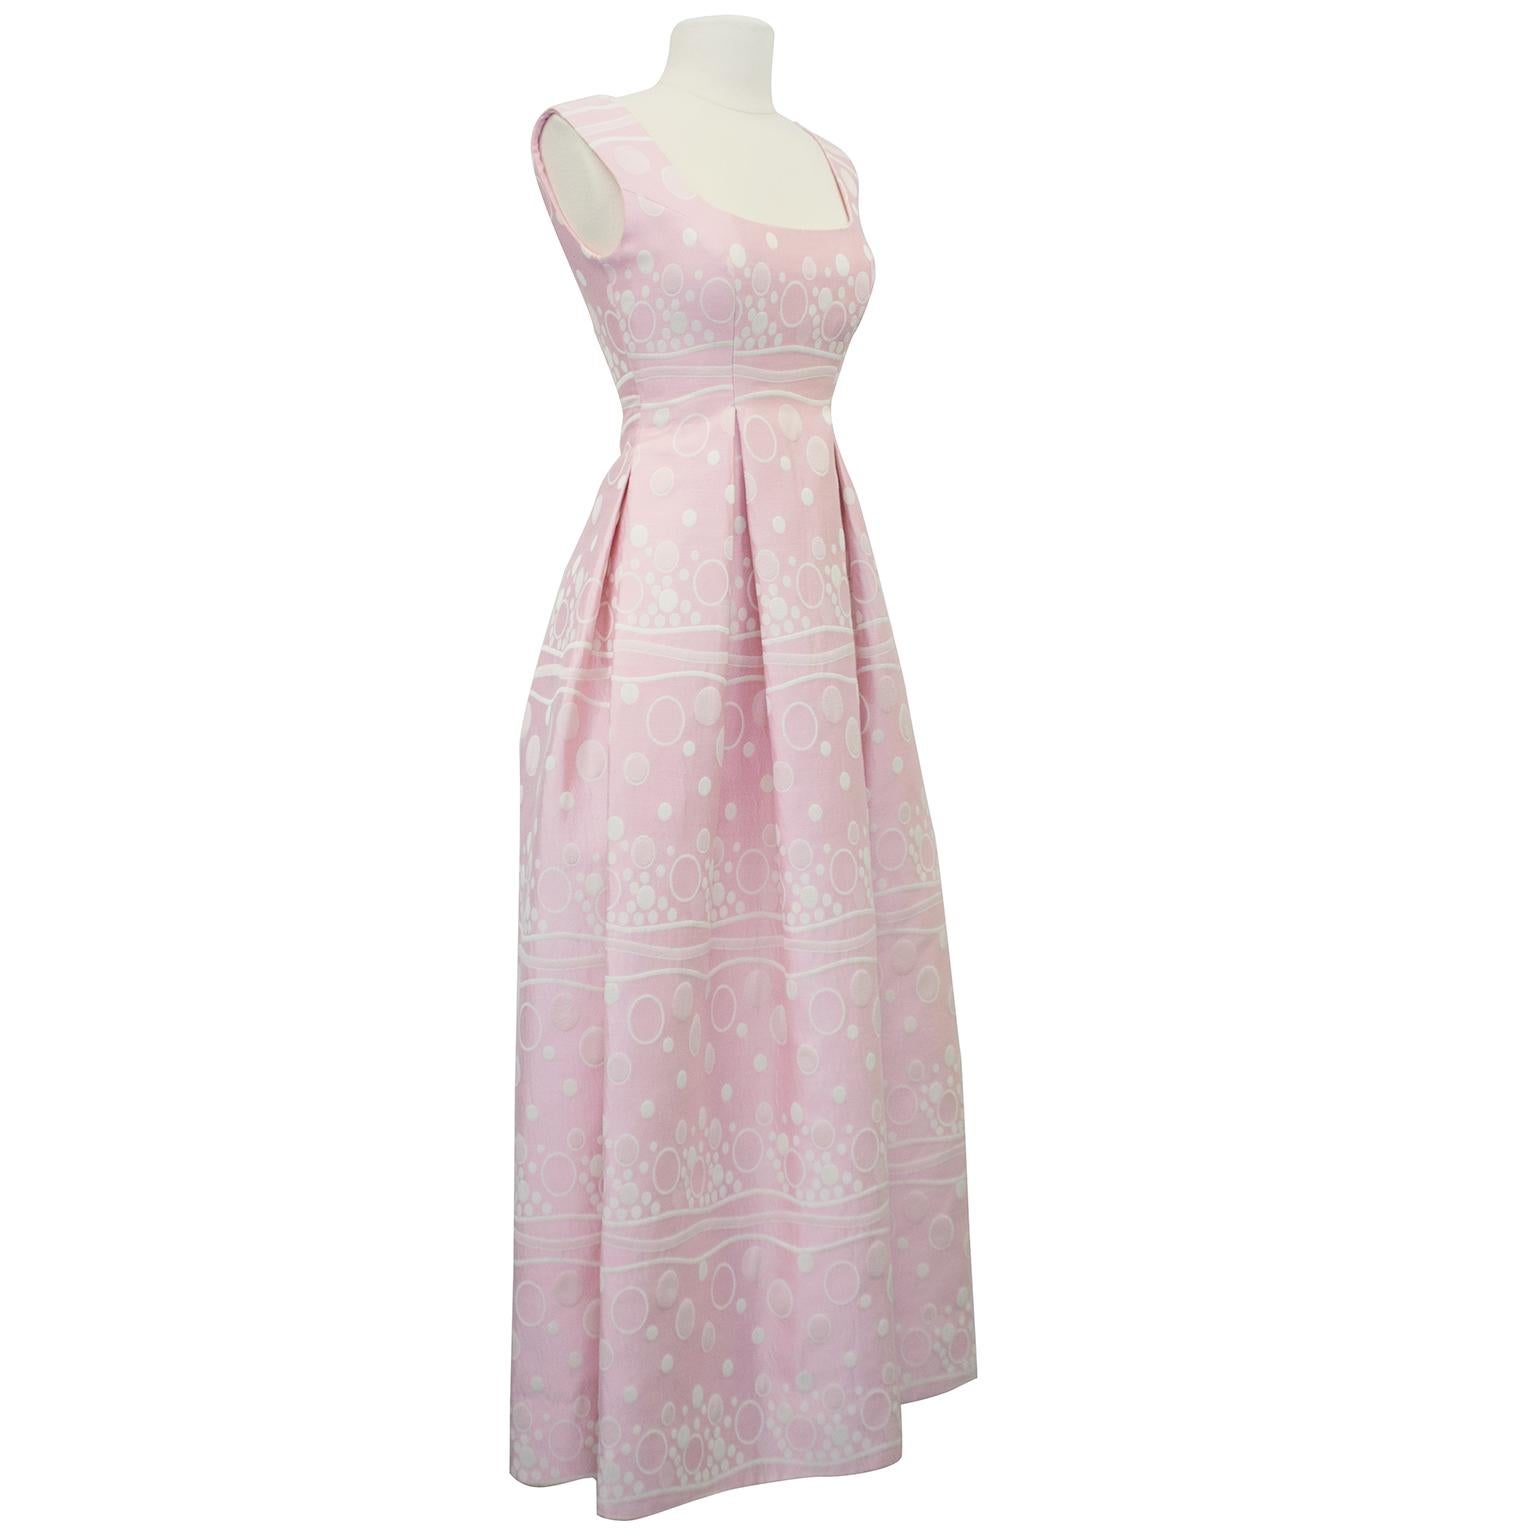 Beautiful and elegant 1960s pink gown with white bubble brocade style print throughout. From the venerable Ester Wolf Boutique in Houston, TX, the gown has a scooped neckline, is fitted through the waist and falls A line to the floor. High back and